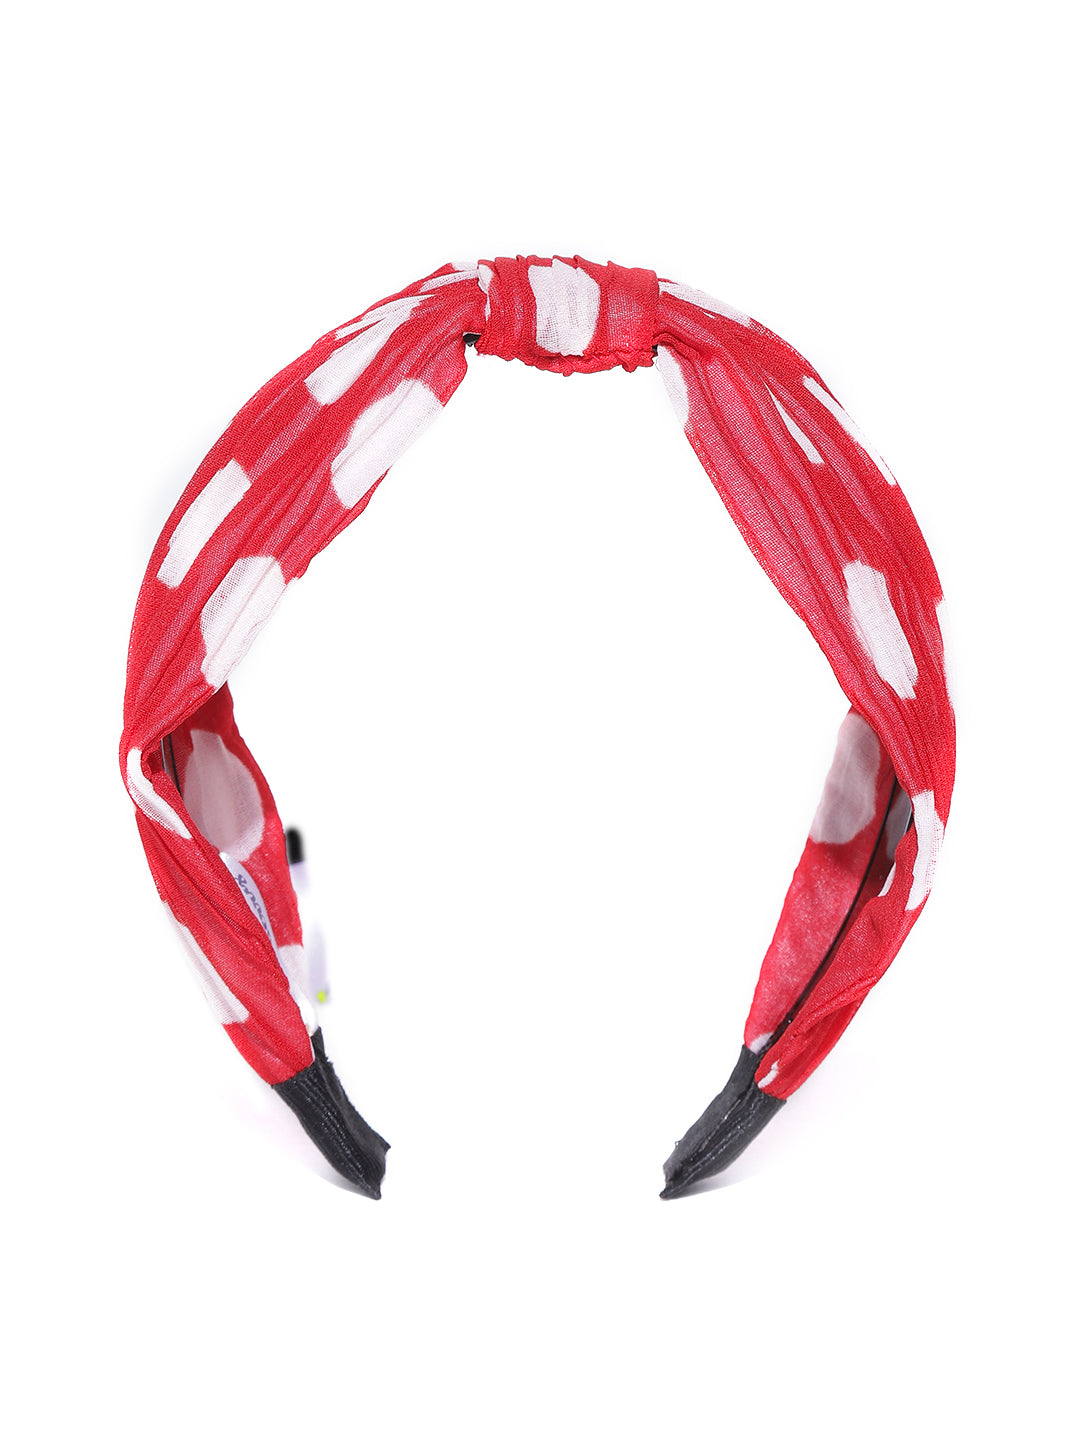 Blueberry white dotted printed red hair band